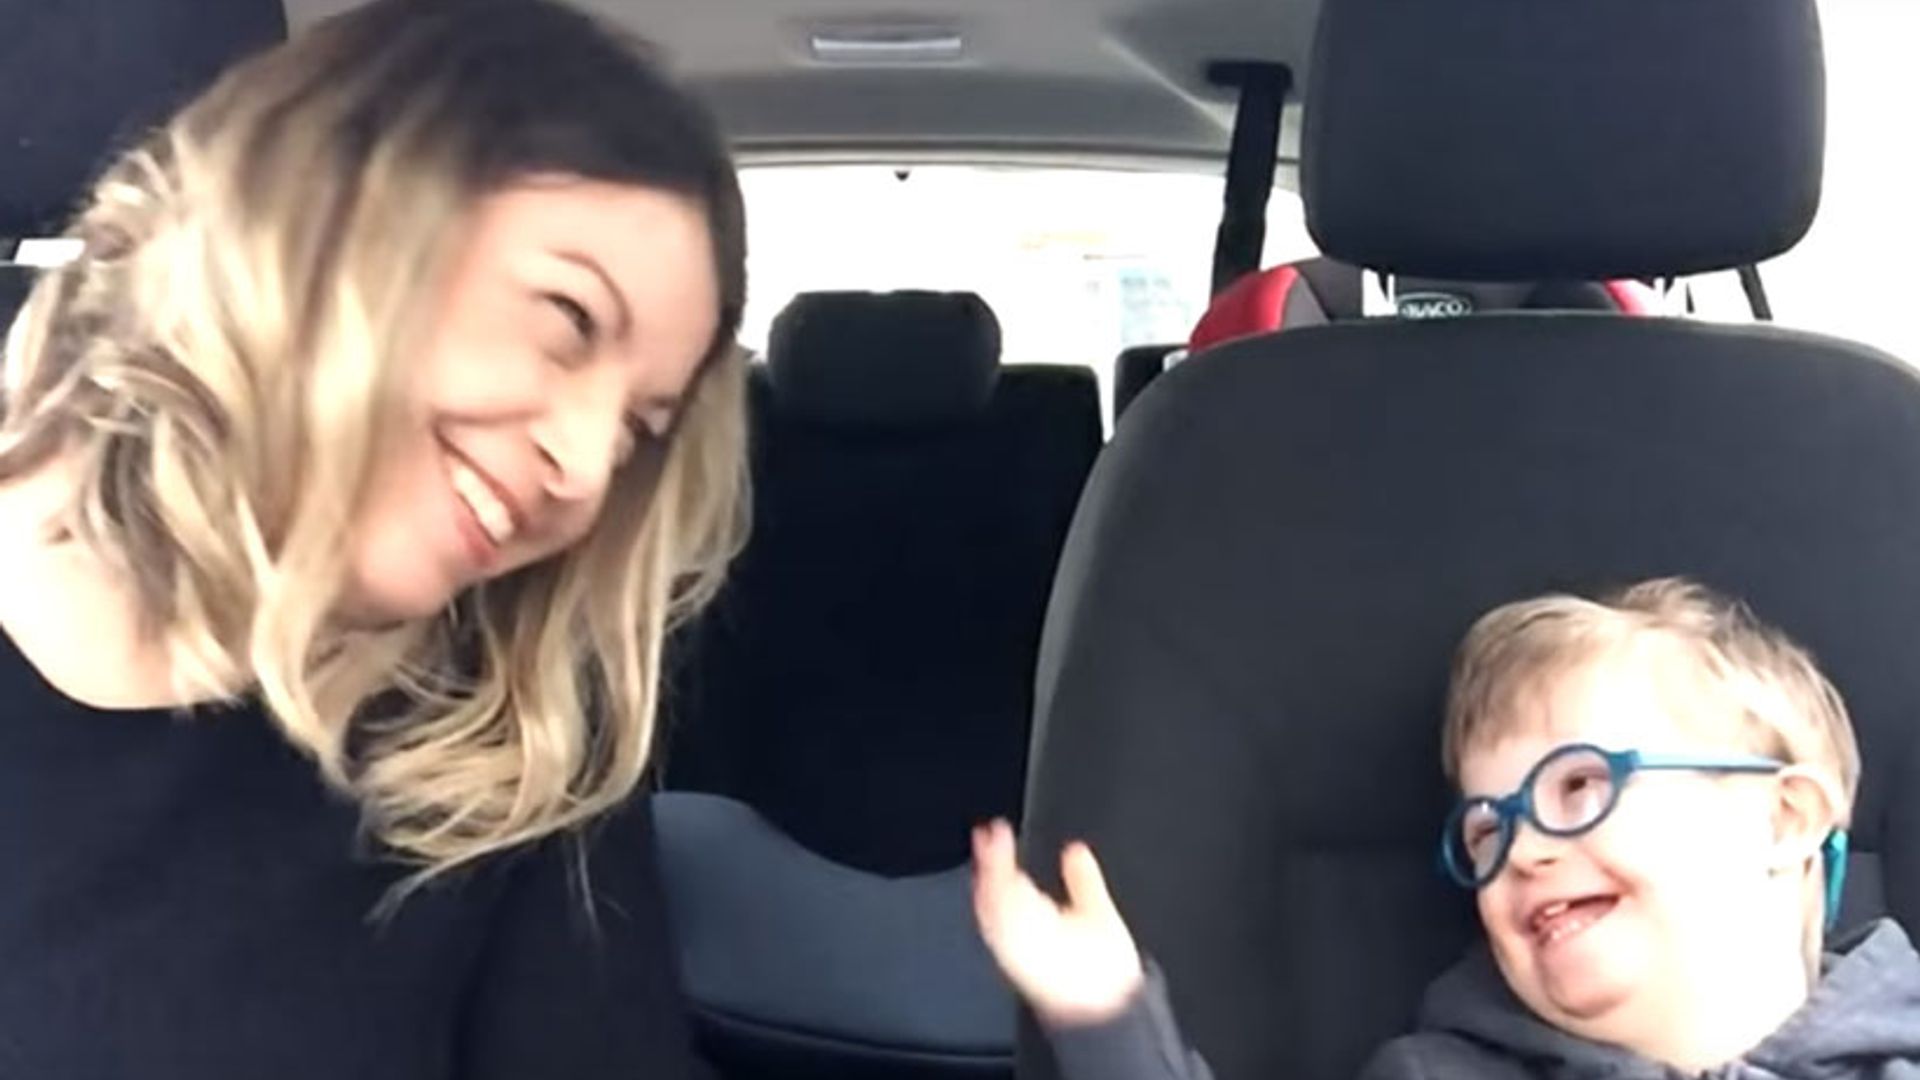 Children with Down's Syndrome take part in special Carpool Karaoke – see the beautiful video